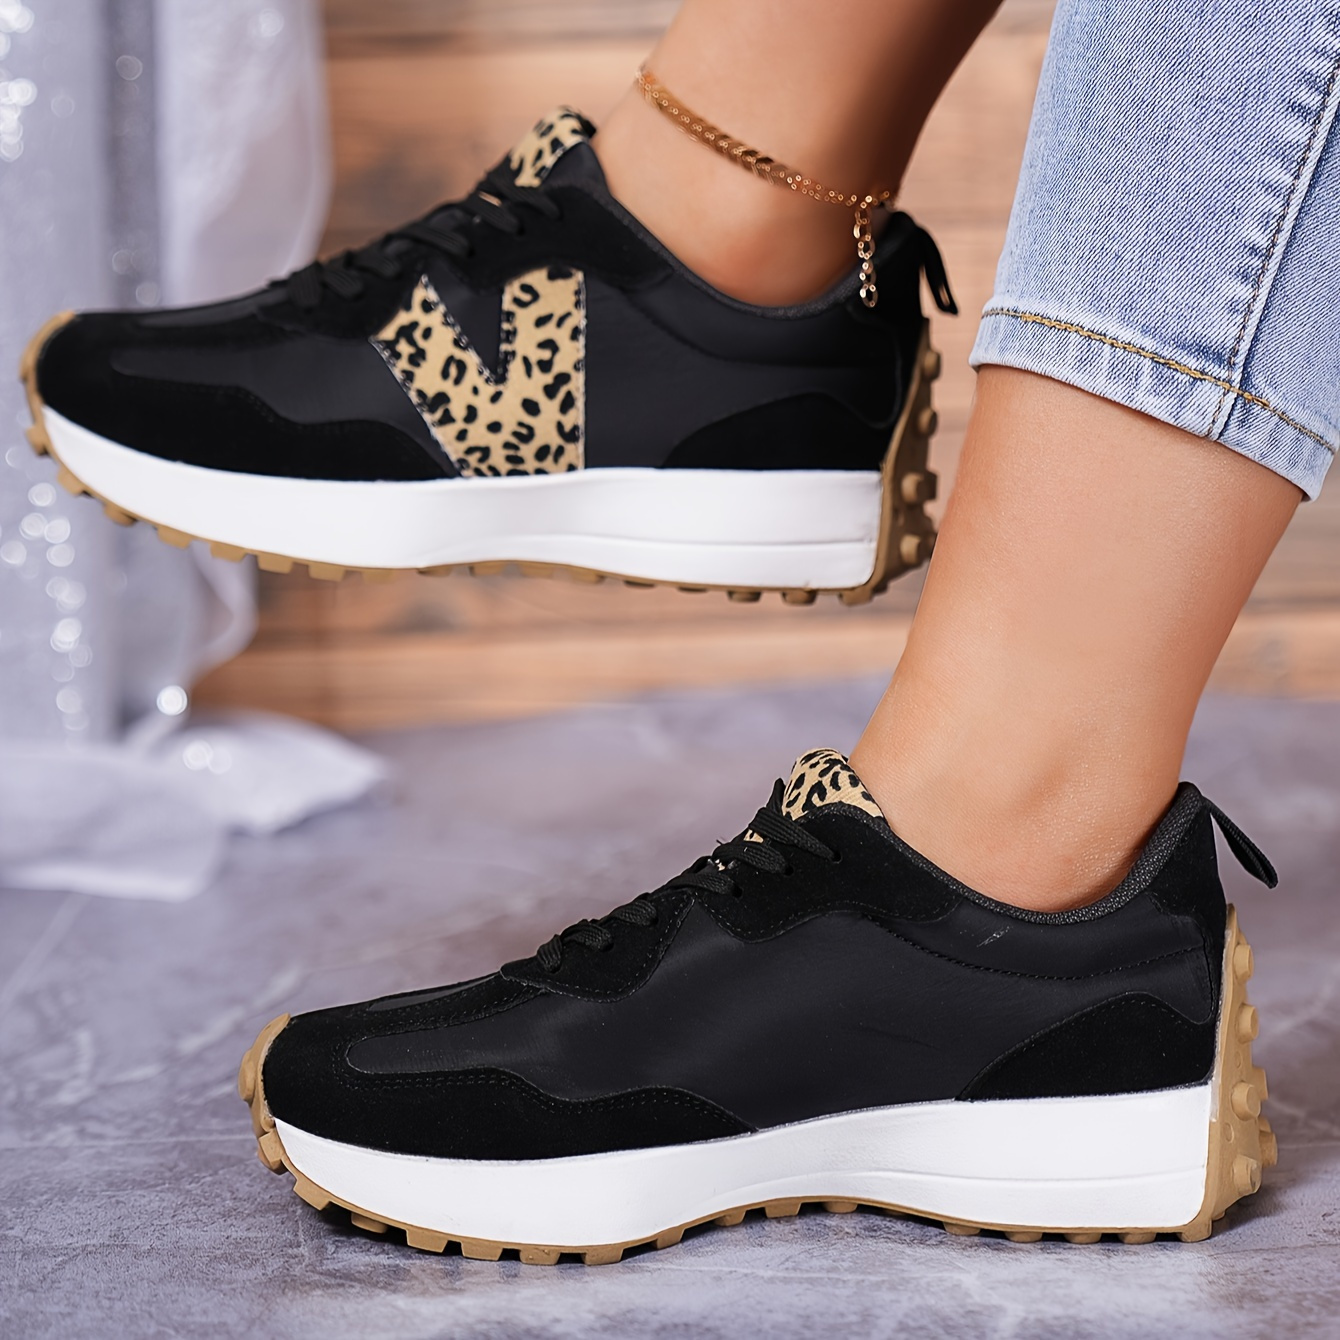 

Women's Leopard Print Platform Sneakers, Casual Lace Up Outdoor Shoes, Comfortable Low Top Sport Shoes